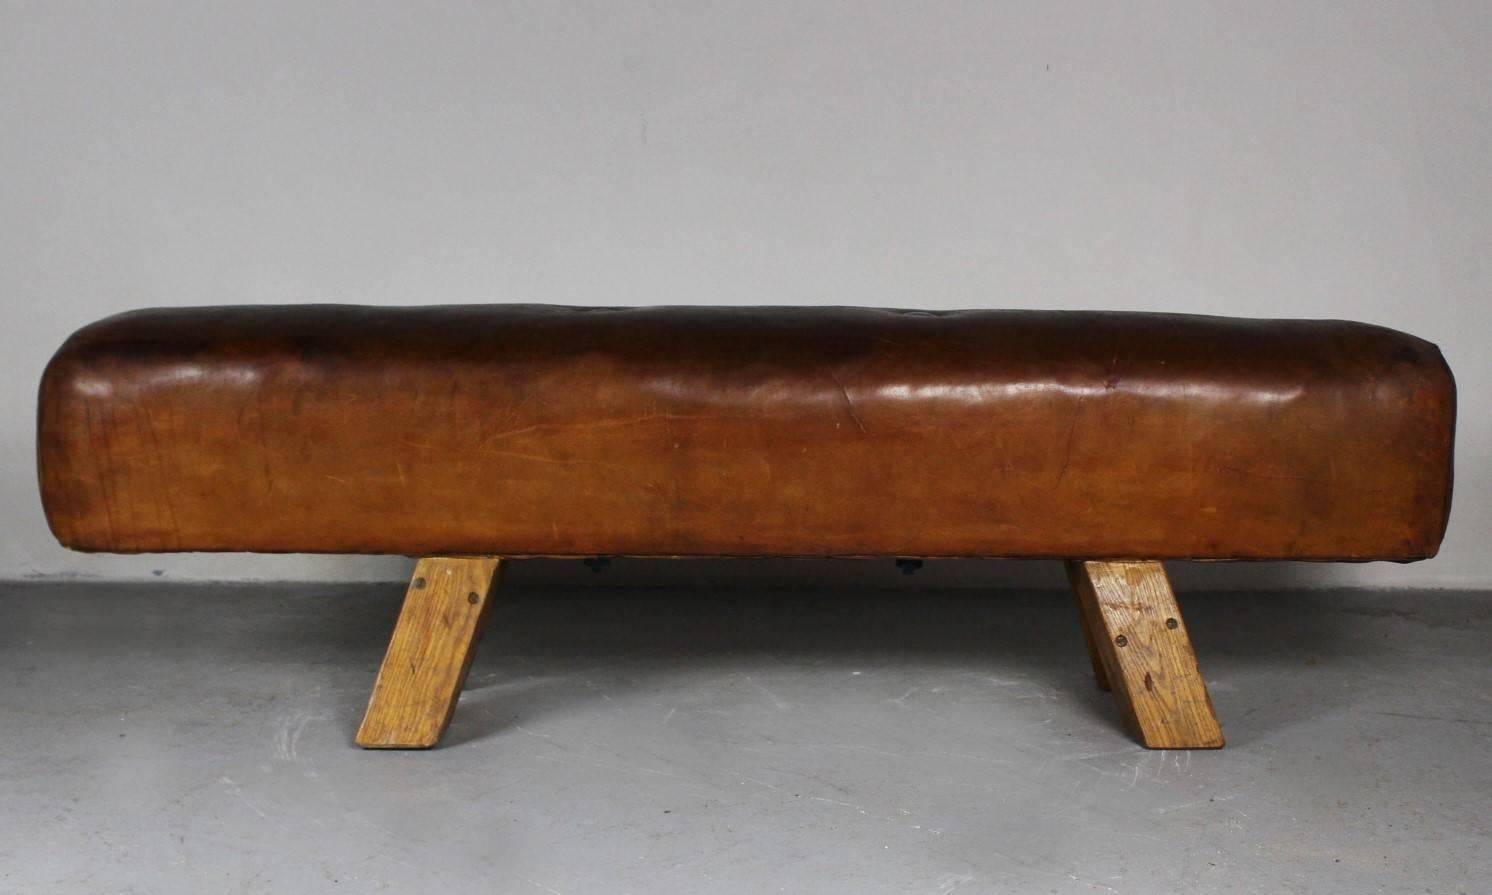 Leather gym pommel horse from the 1950s. Very good original condition.